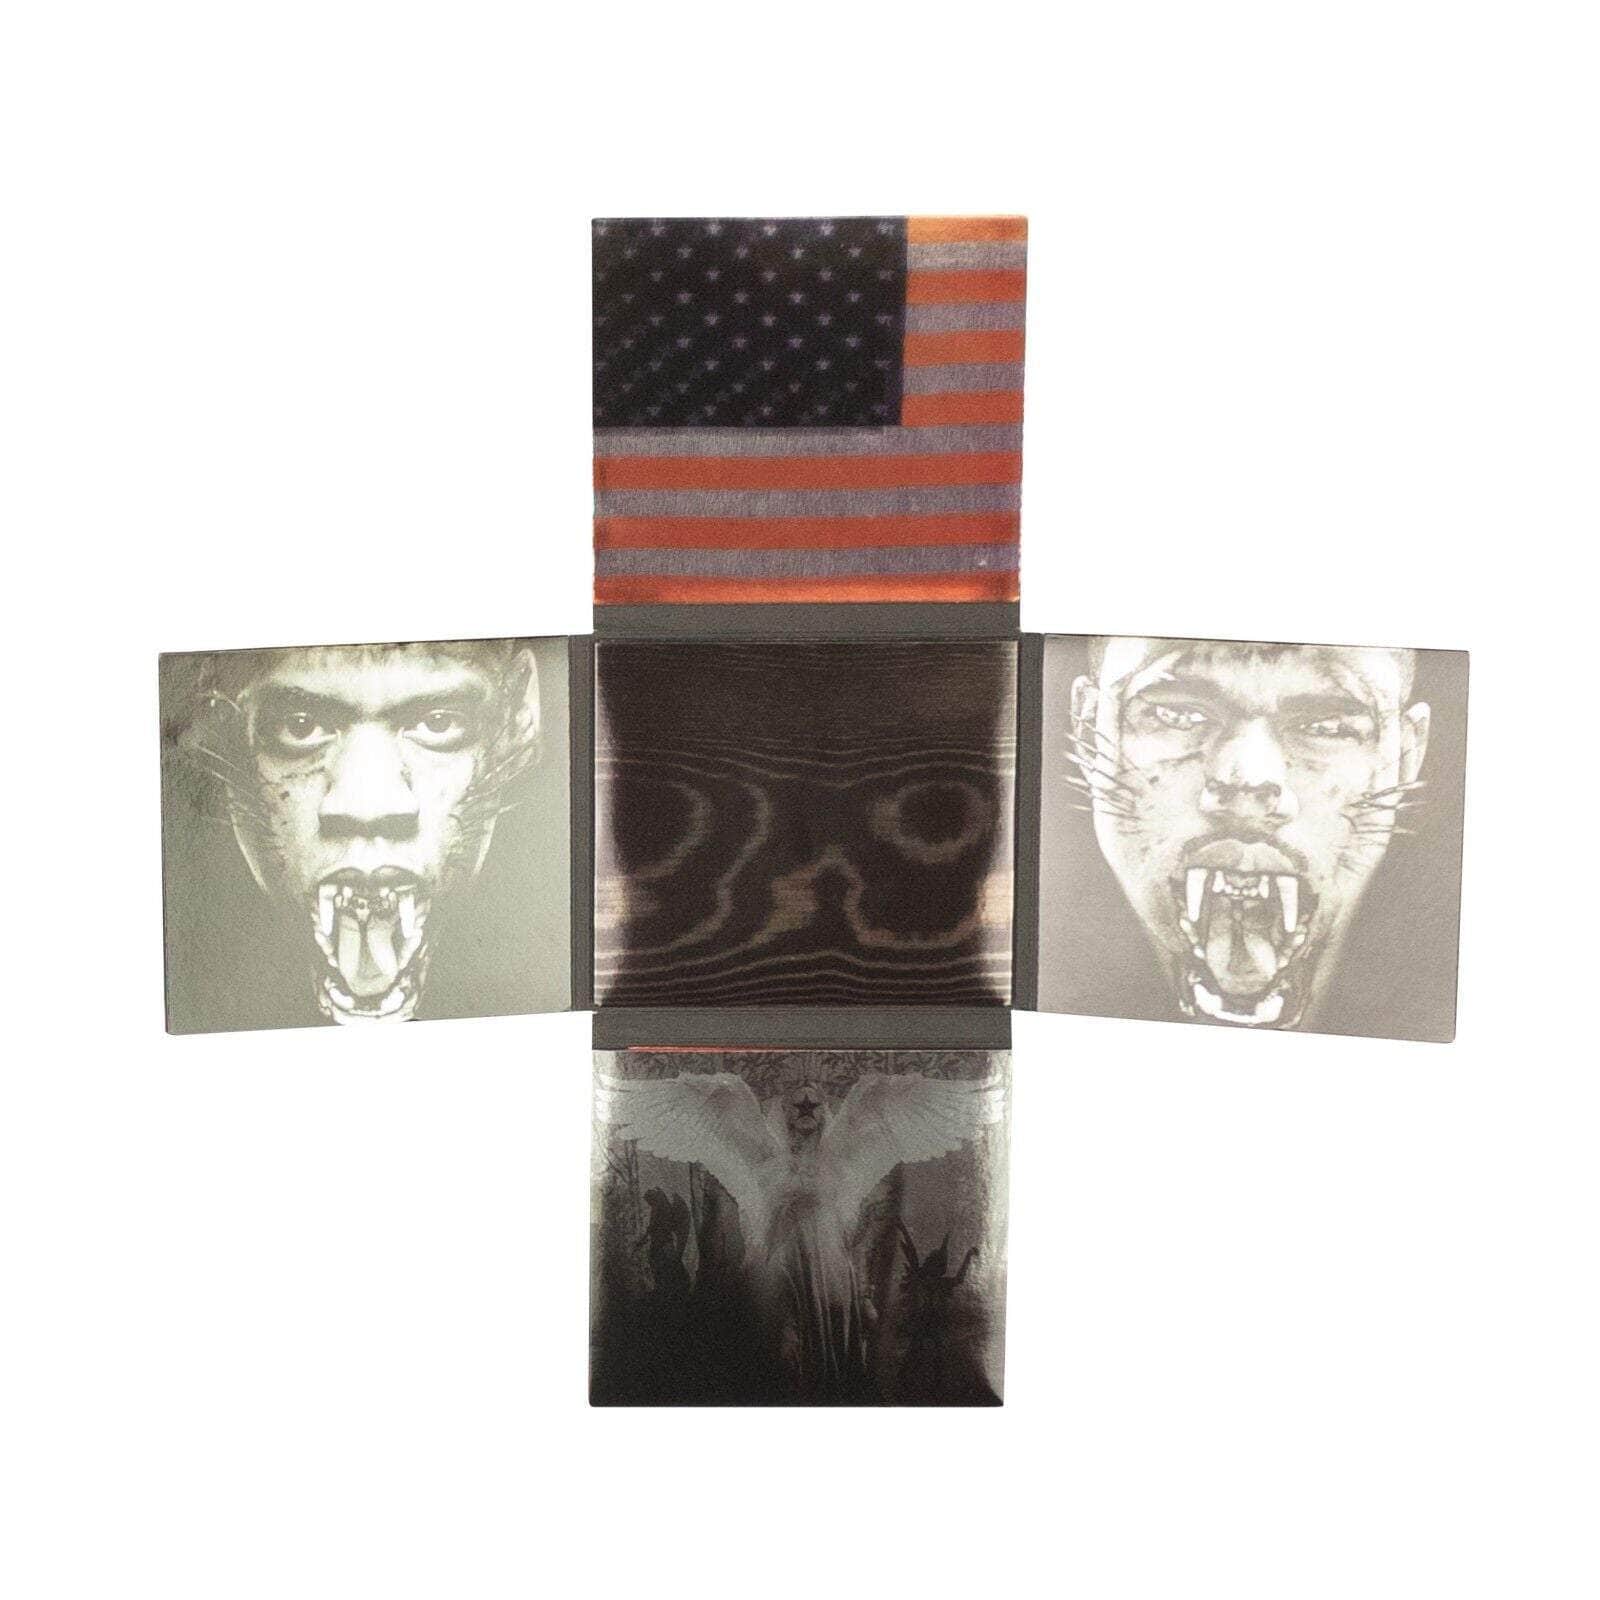 watch the throne vinyl picture disc set